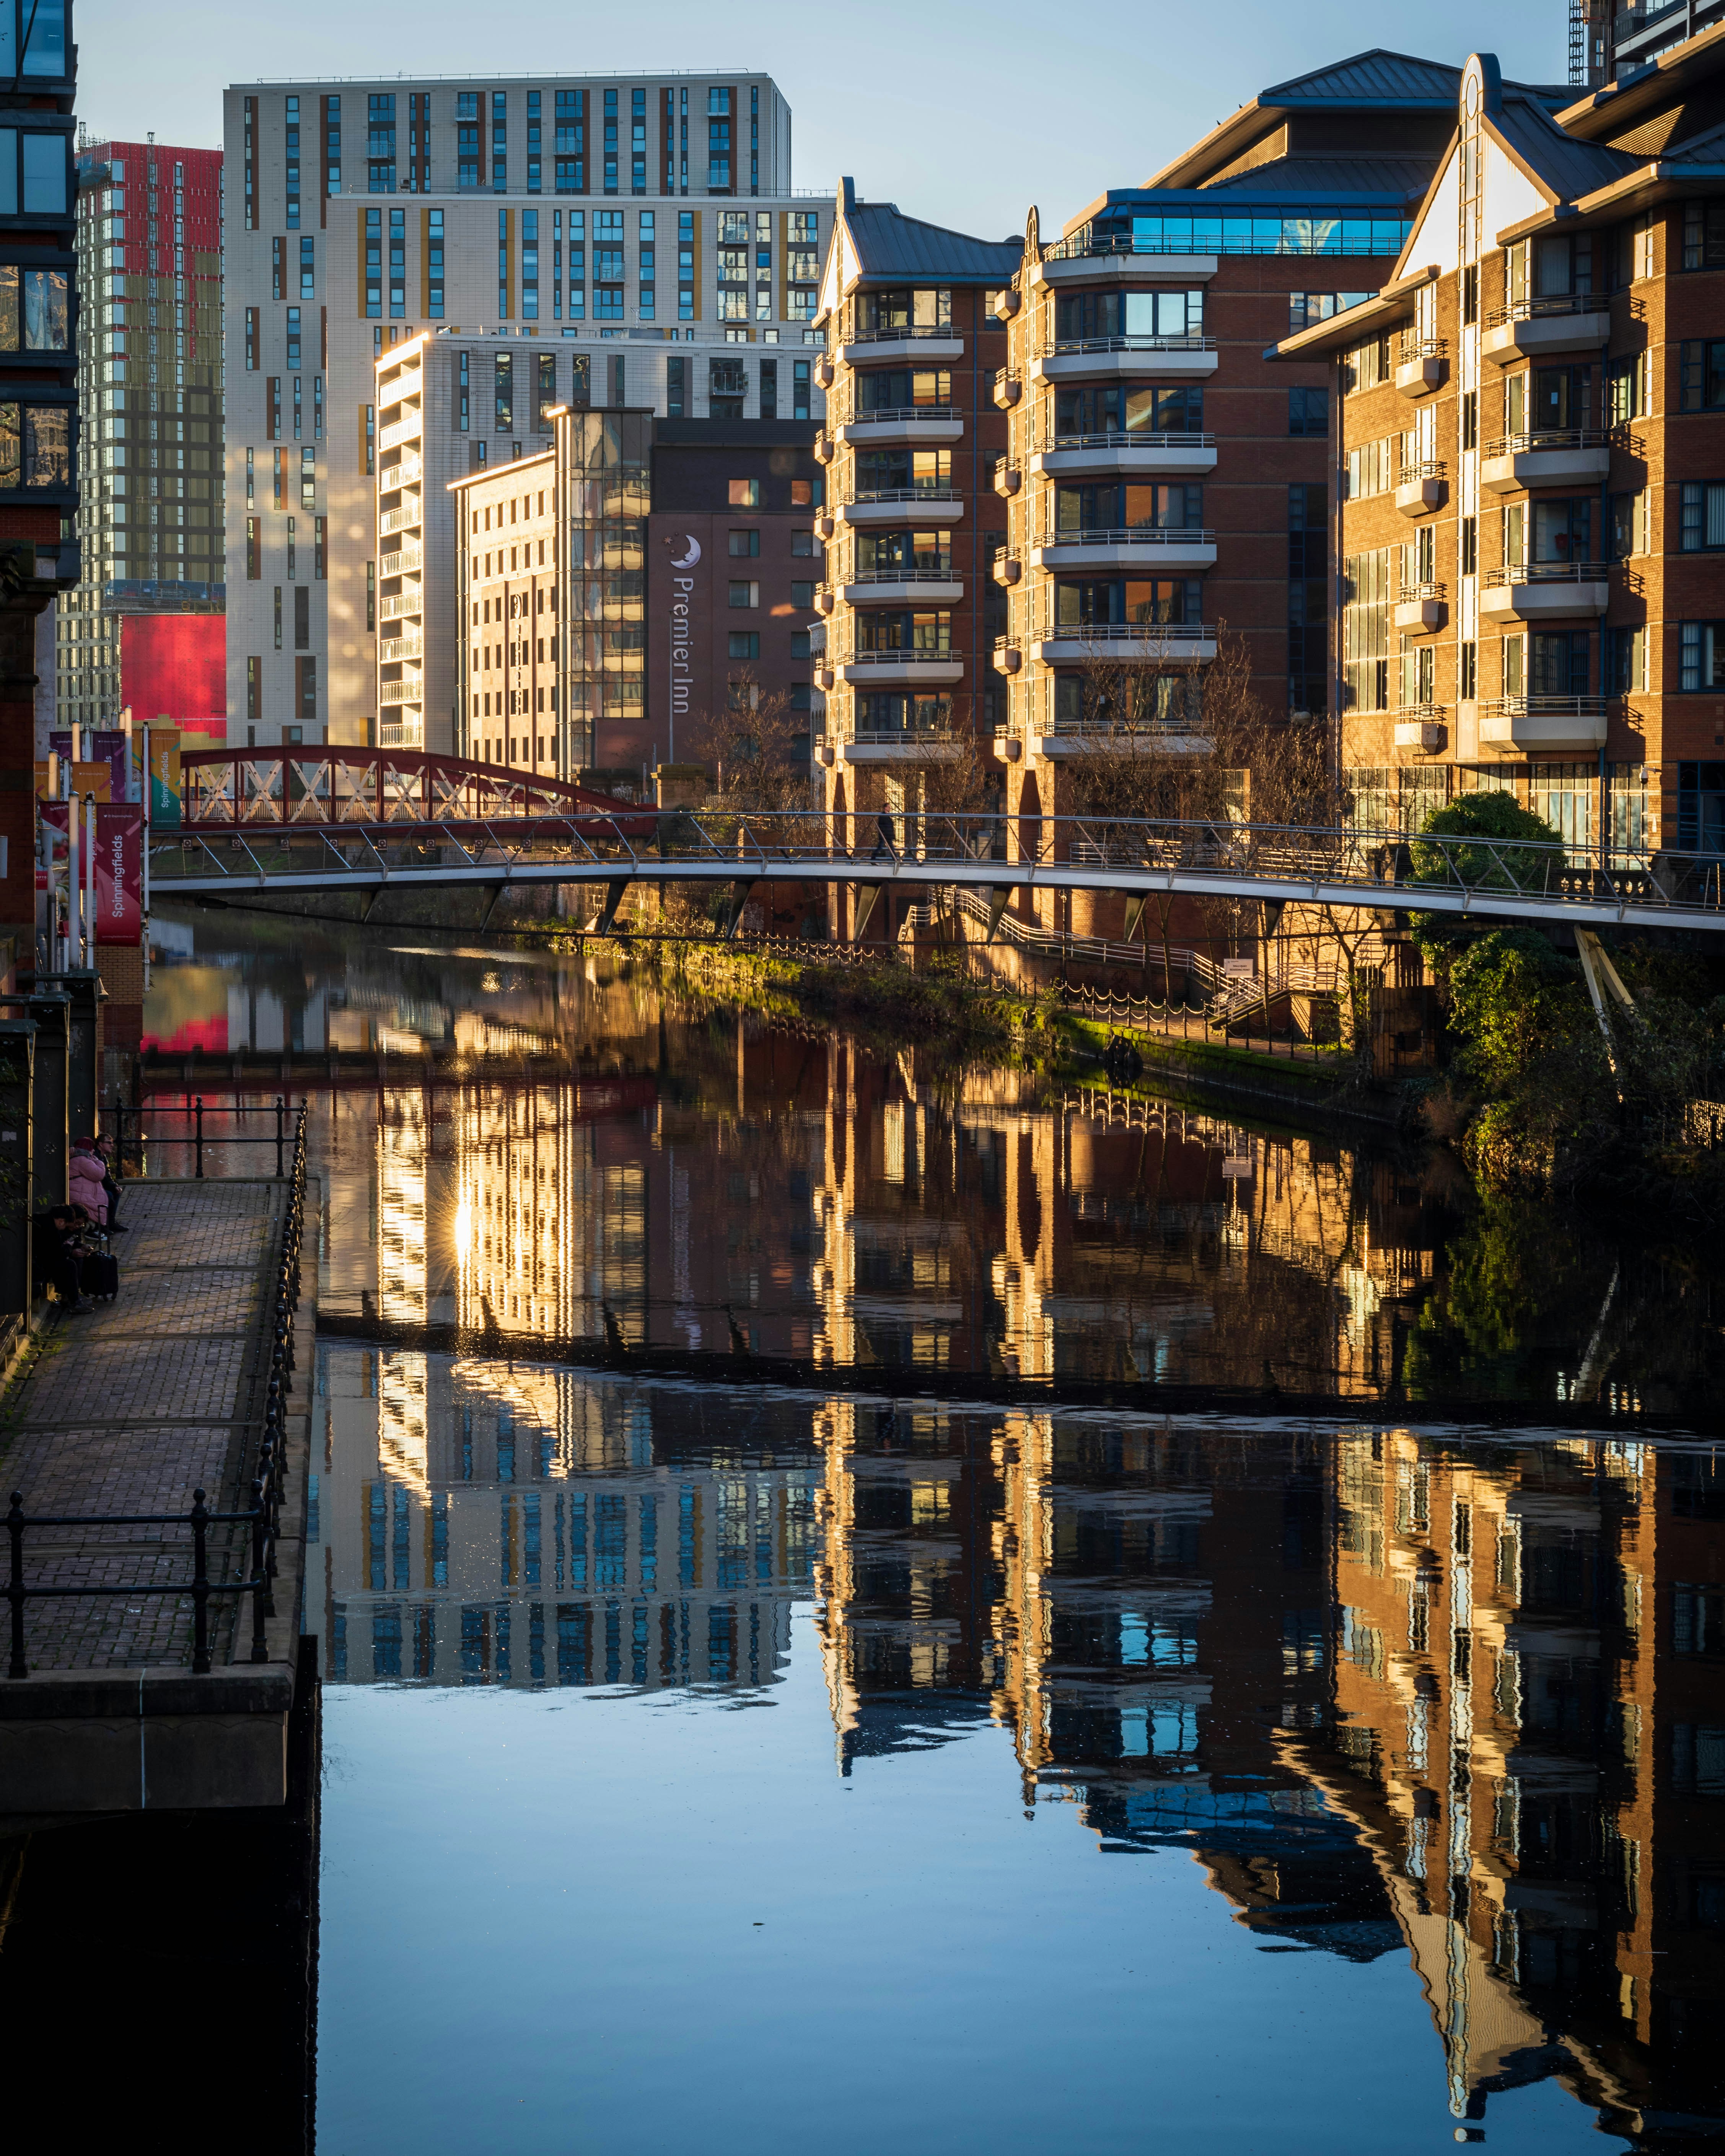 Reflections along a canal in Manchester.